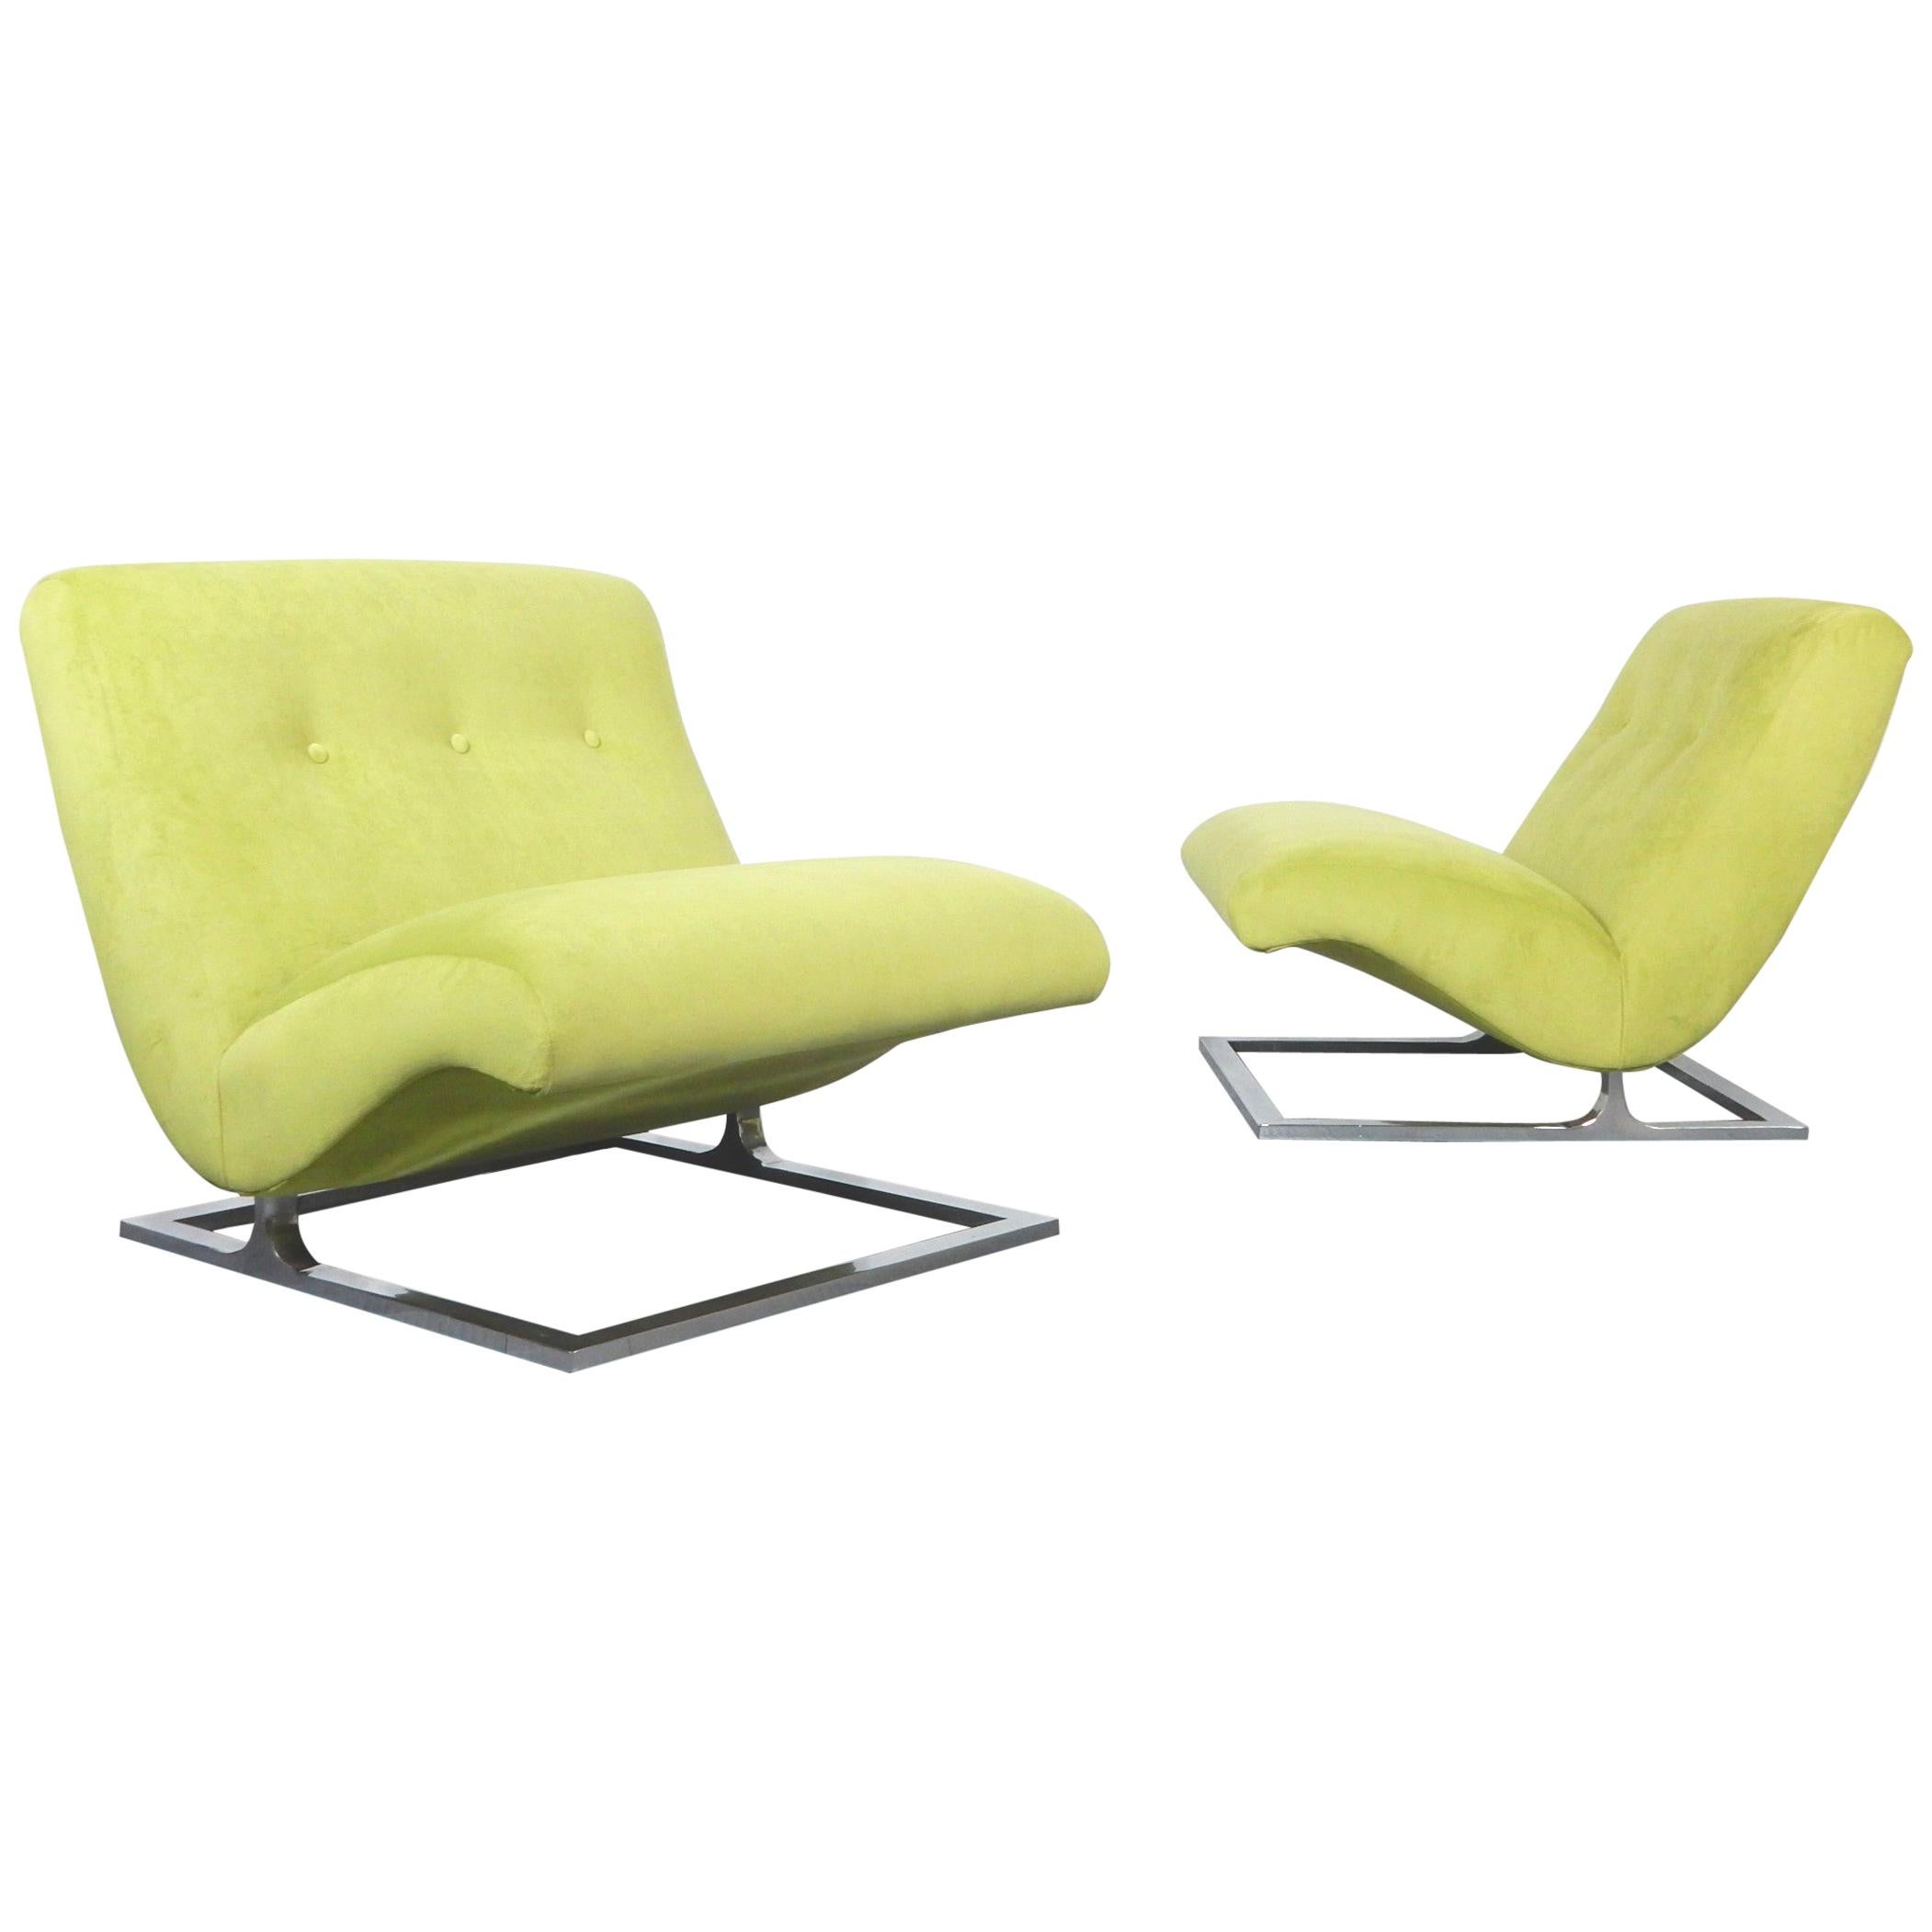 Vintage Scoop Cantilever Lounge Chairs 1970's